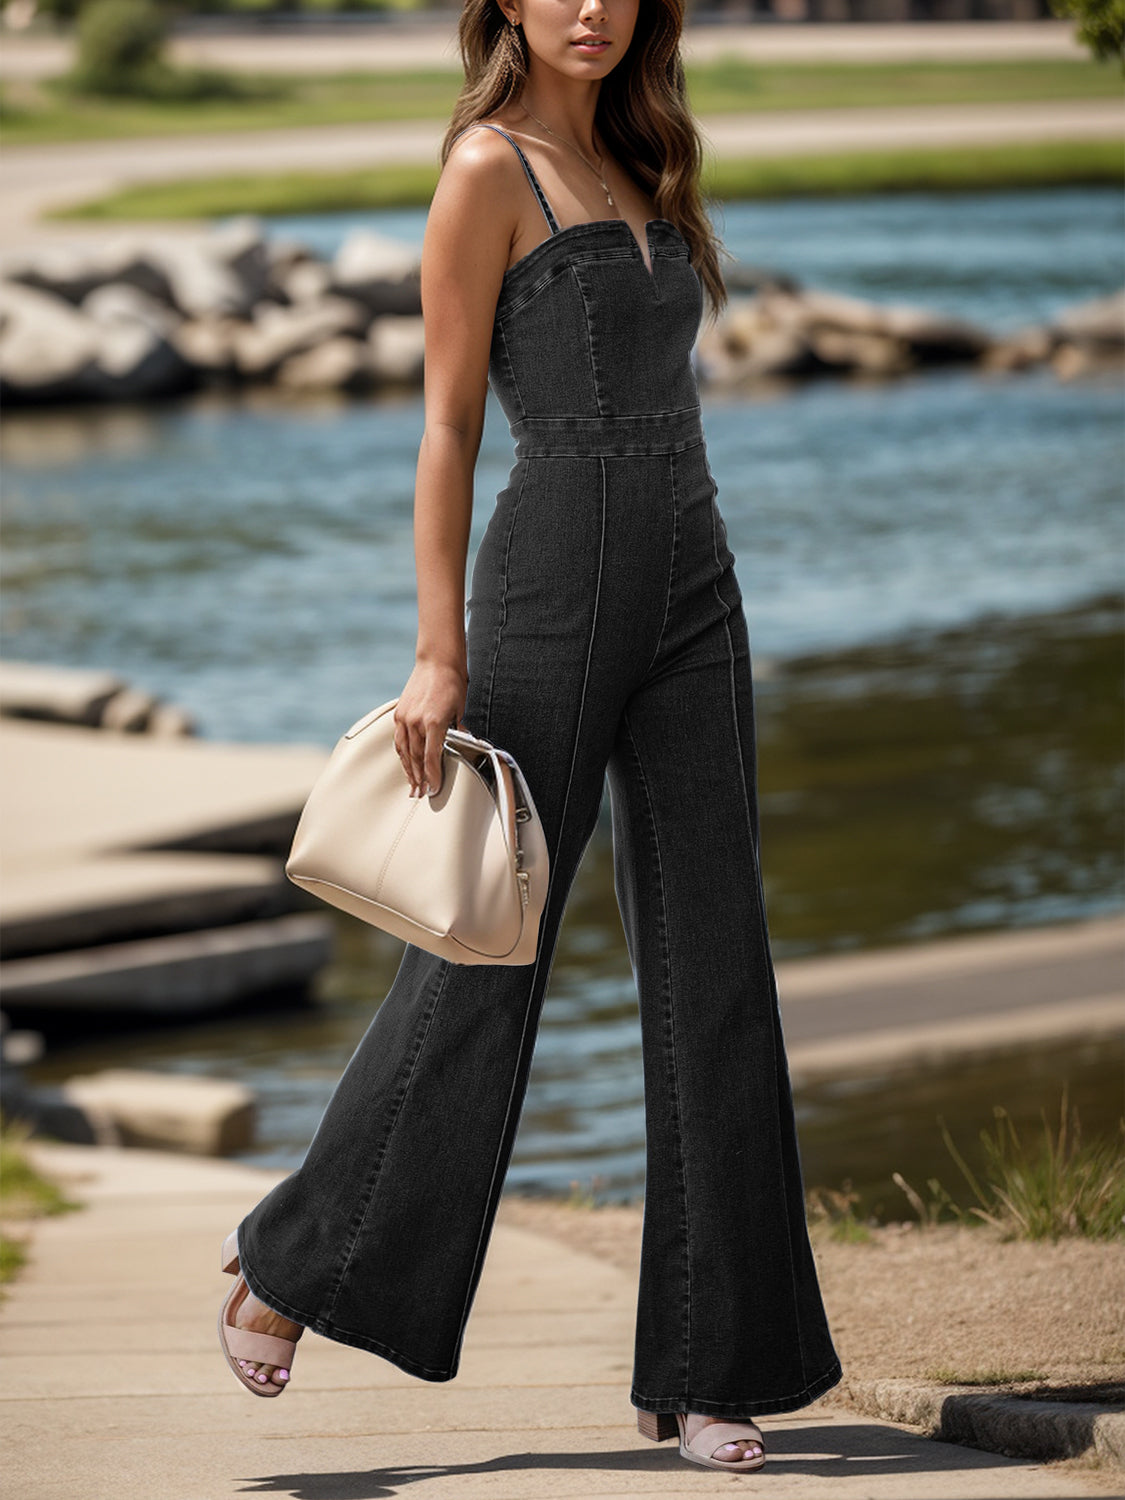 Two images of a woman wearing chic flared denim overalls: one in black and one in blue. Each paired with a white top, she is walking along a tree-lined path, accessorized with a necklace and carrying a cream handbag.